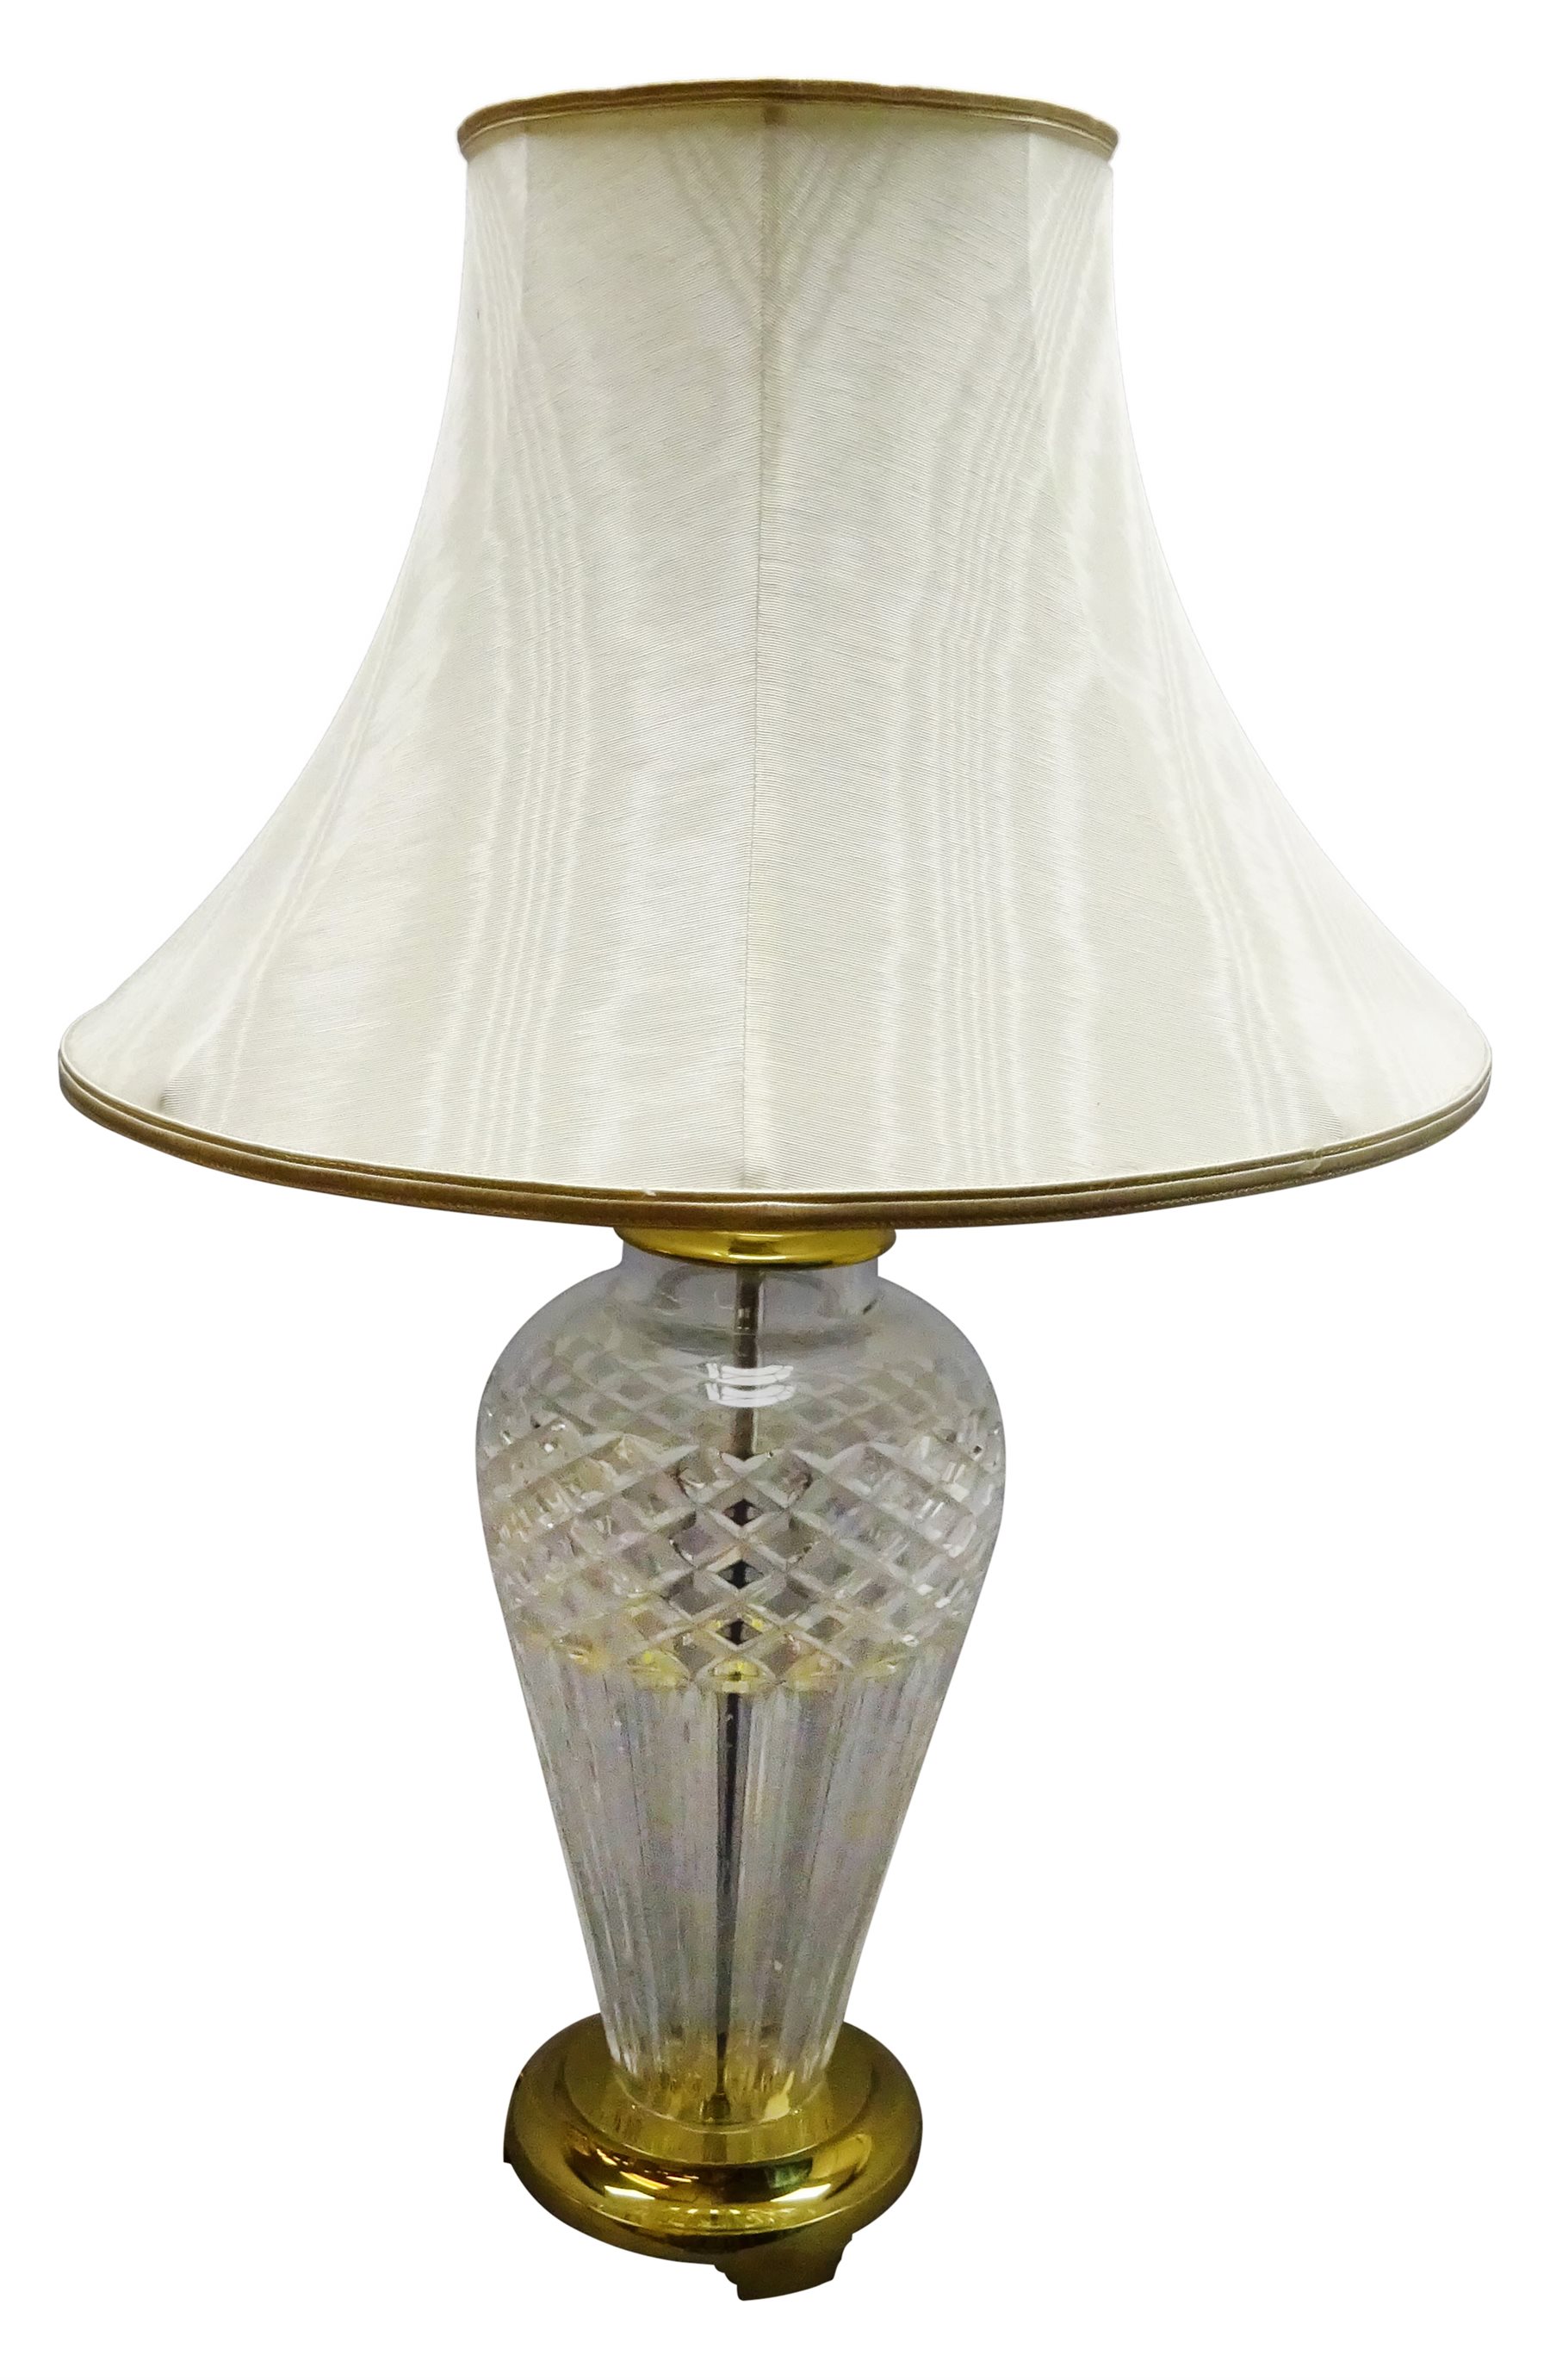 Waterford Crystal Belline Pattern, Waterford Crystal Table Lamps Auction